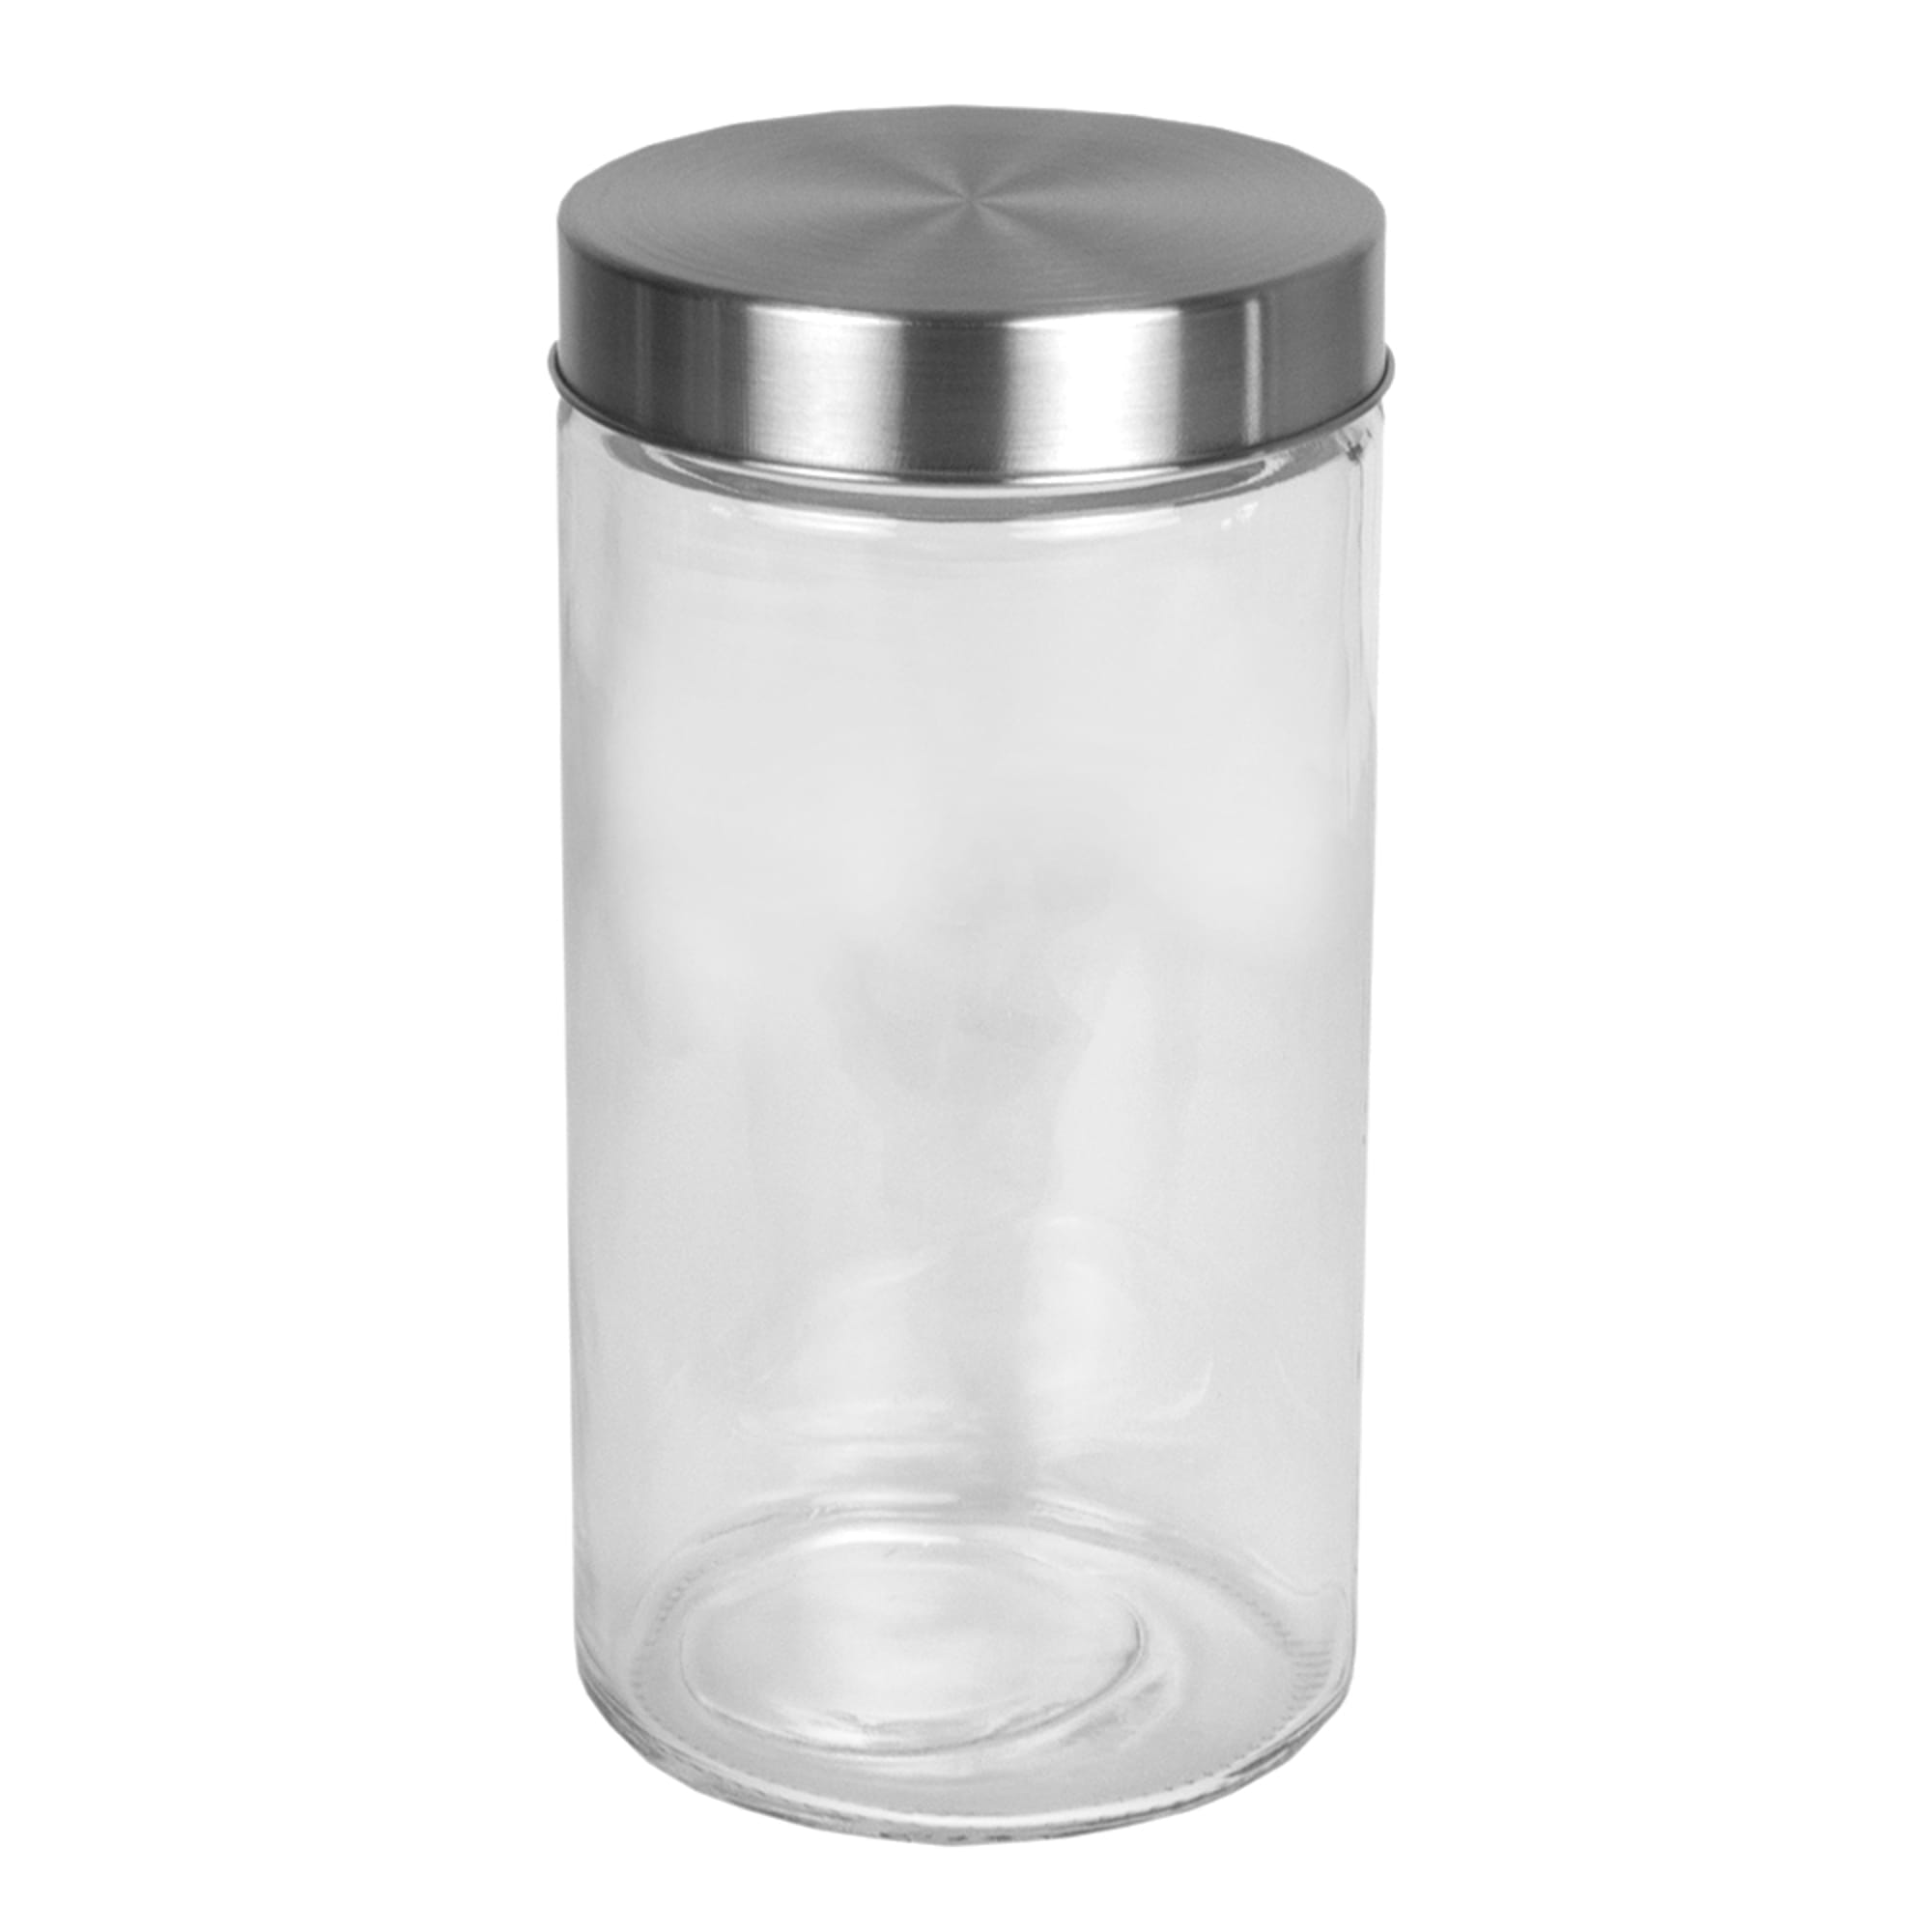 Home Basics 4 Piece Glass Canister Set with Stainless Steel Lids $15.00 EACH, CASE PACK OF 6